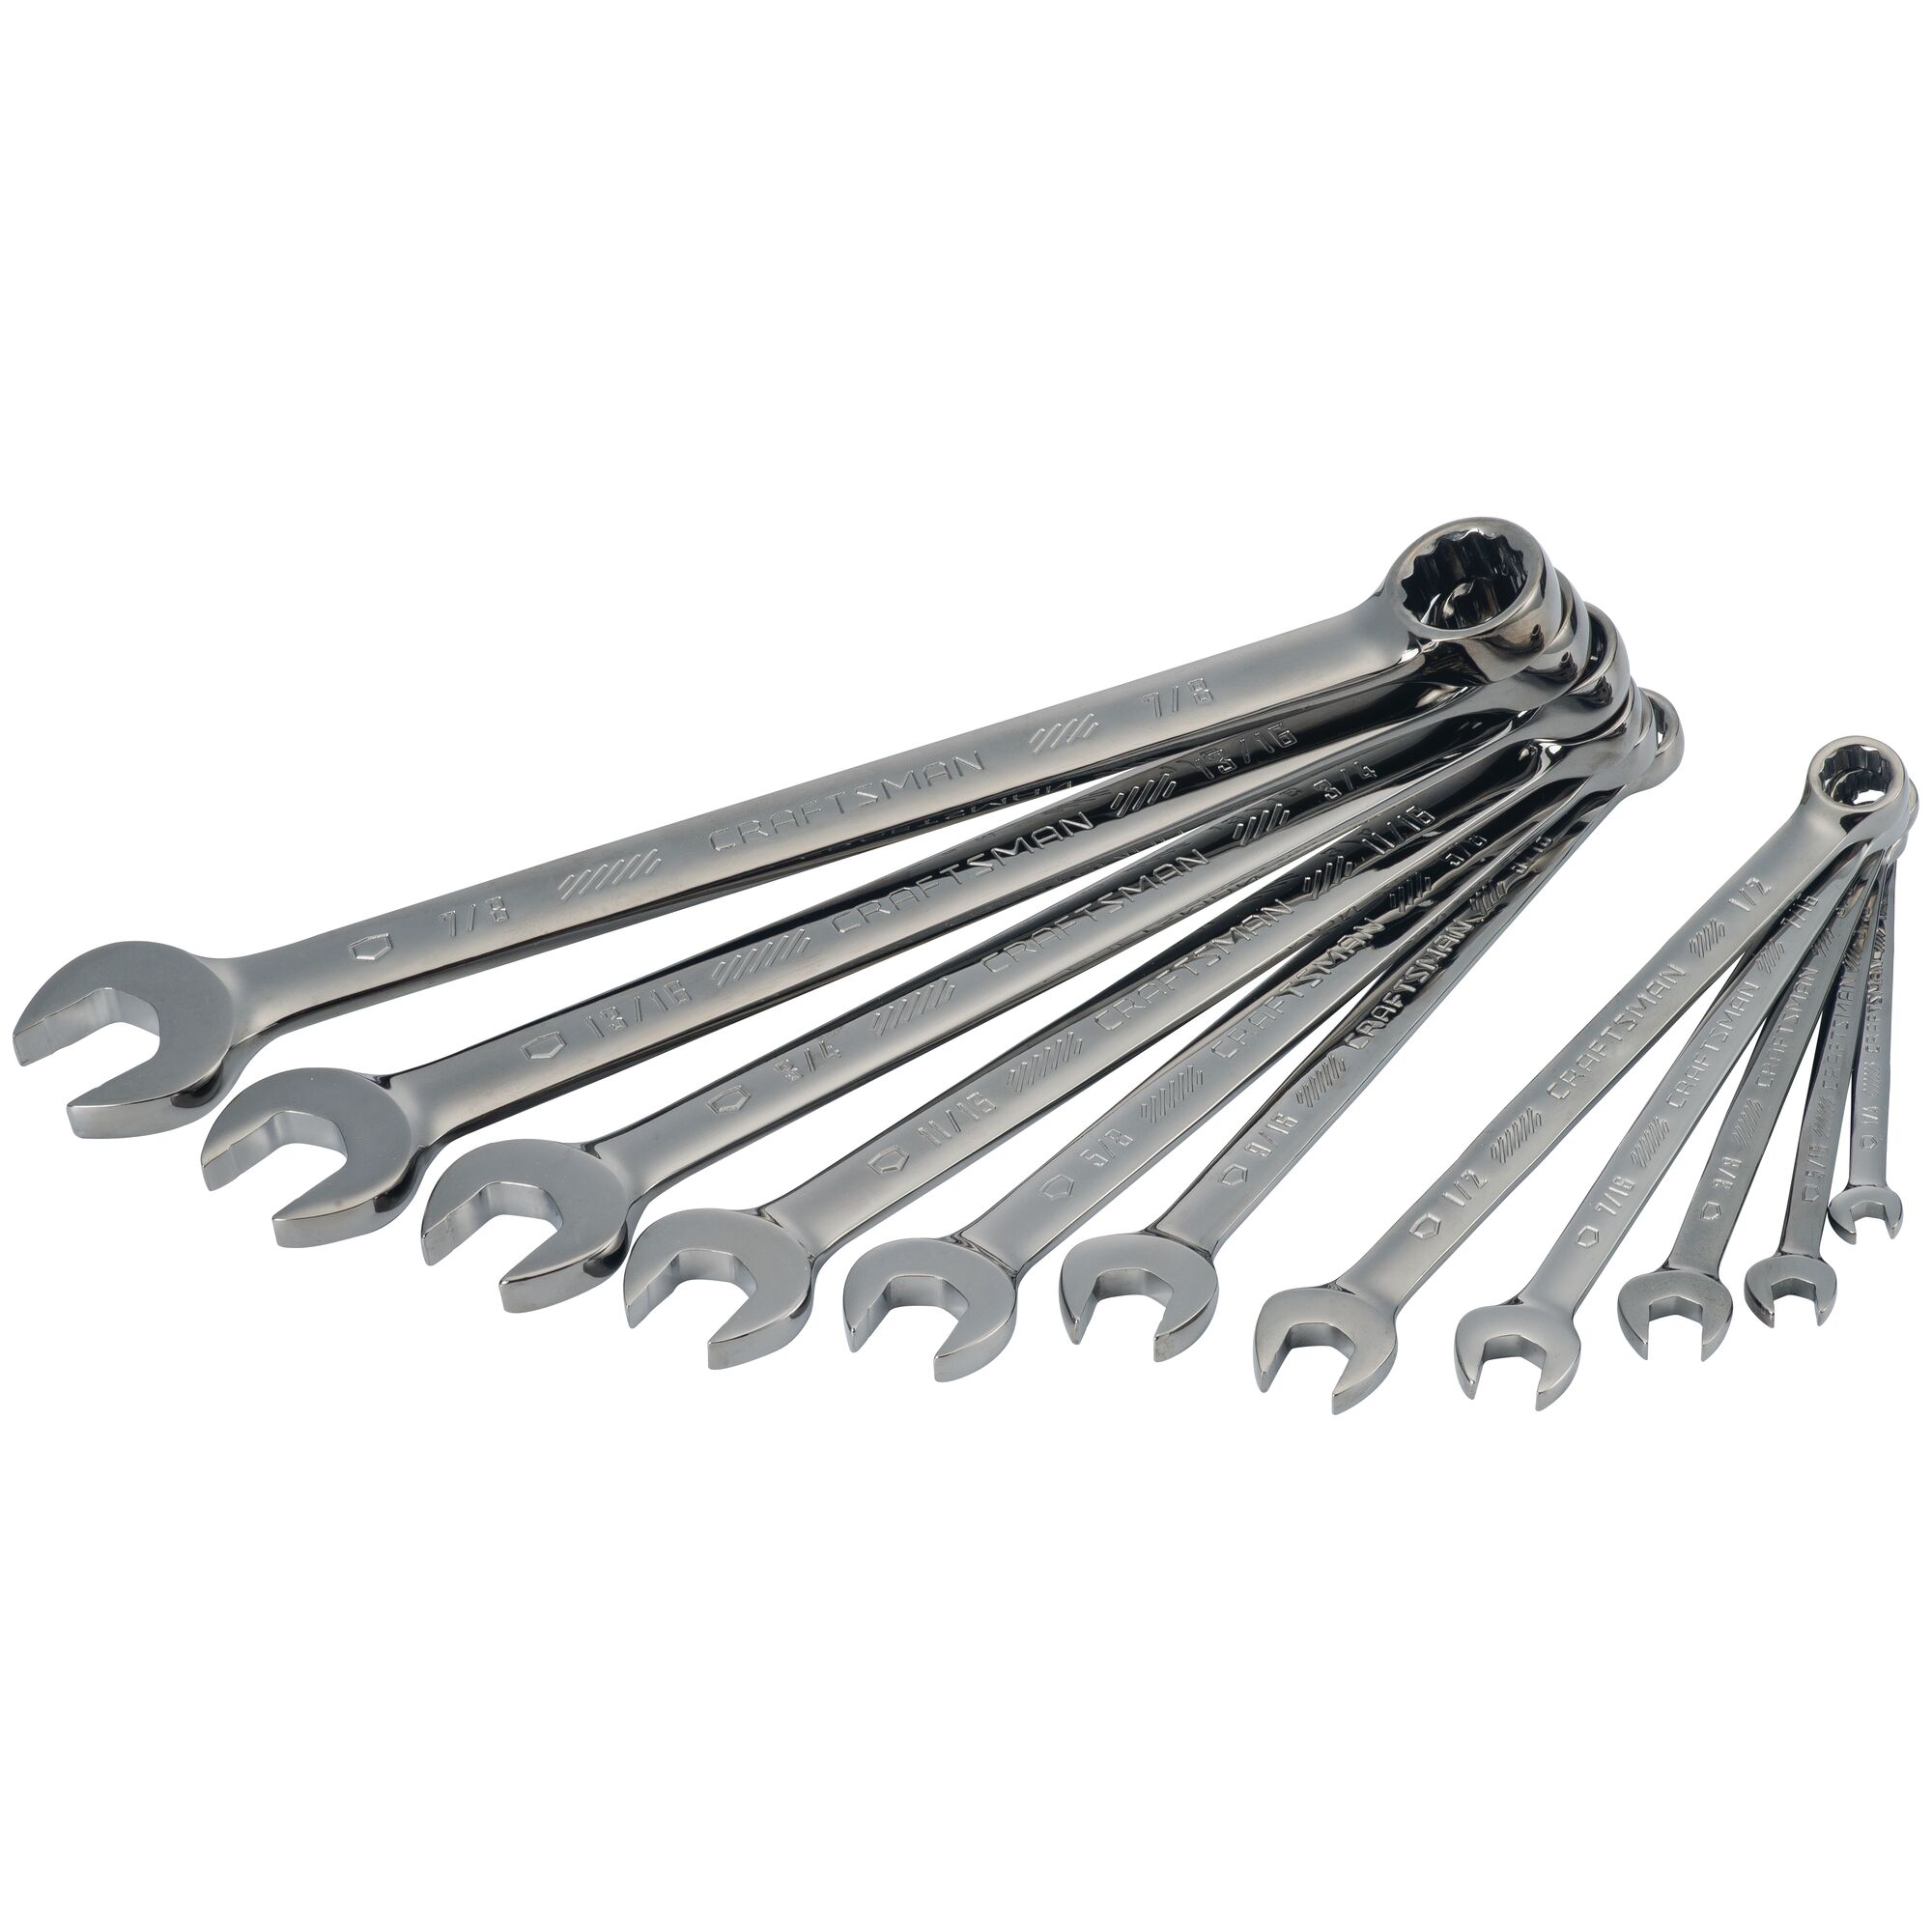 View of CRAFTSMAN Wrenches on white background